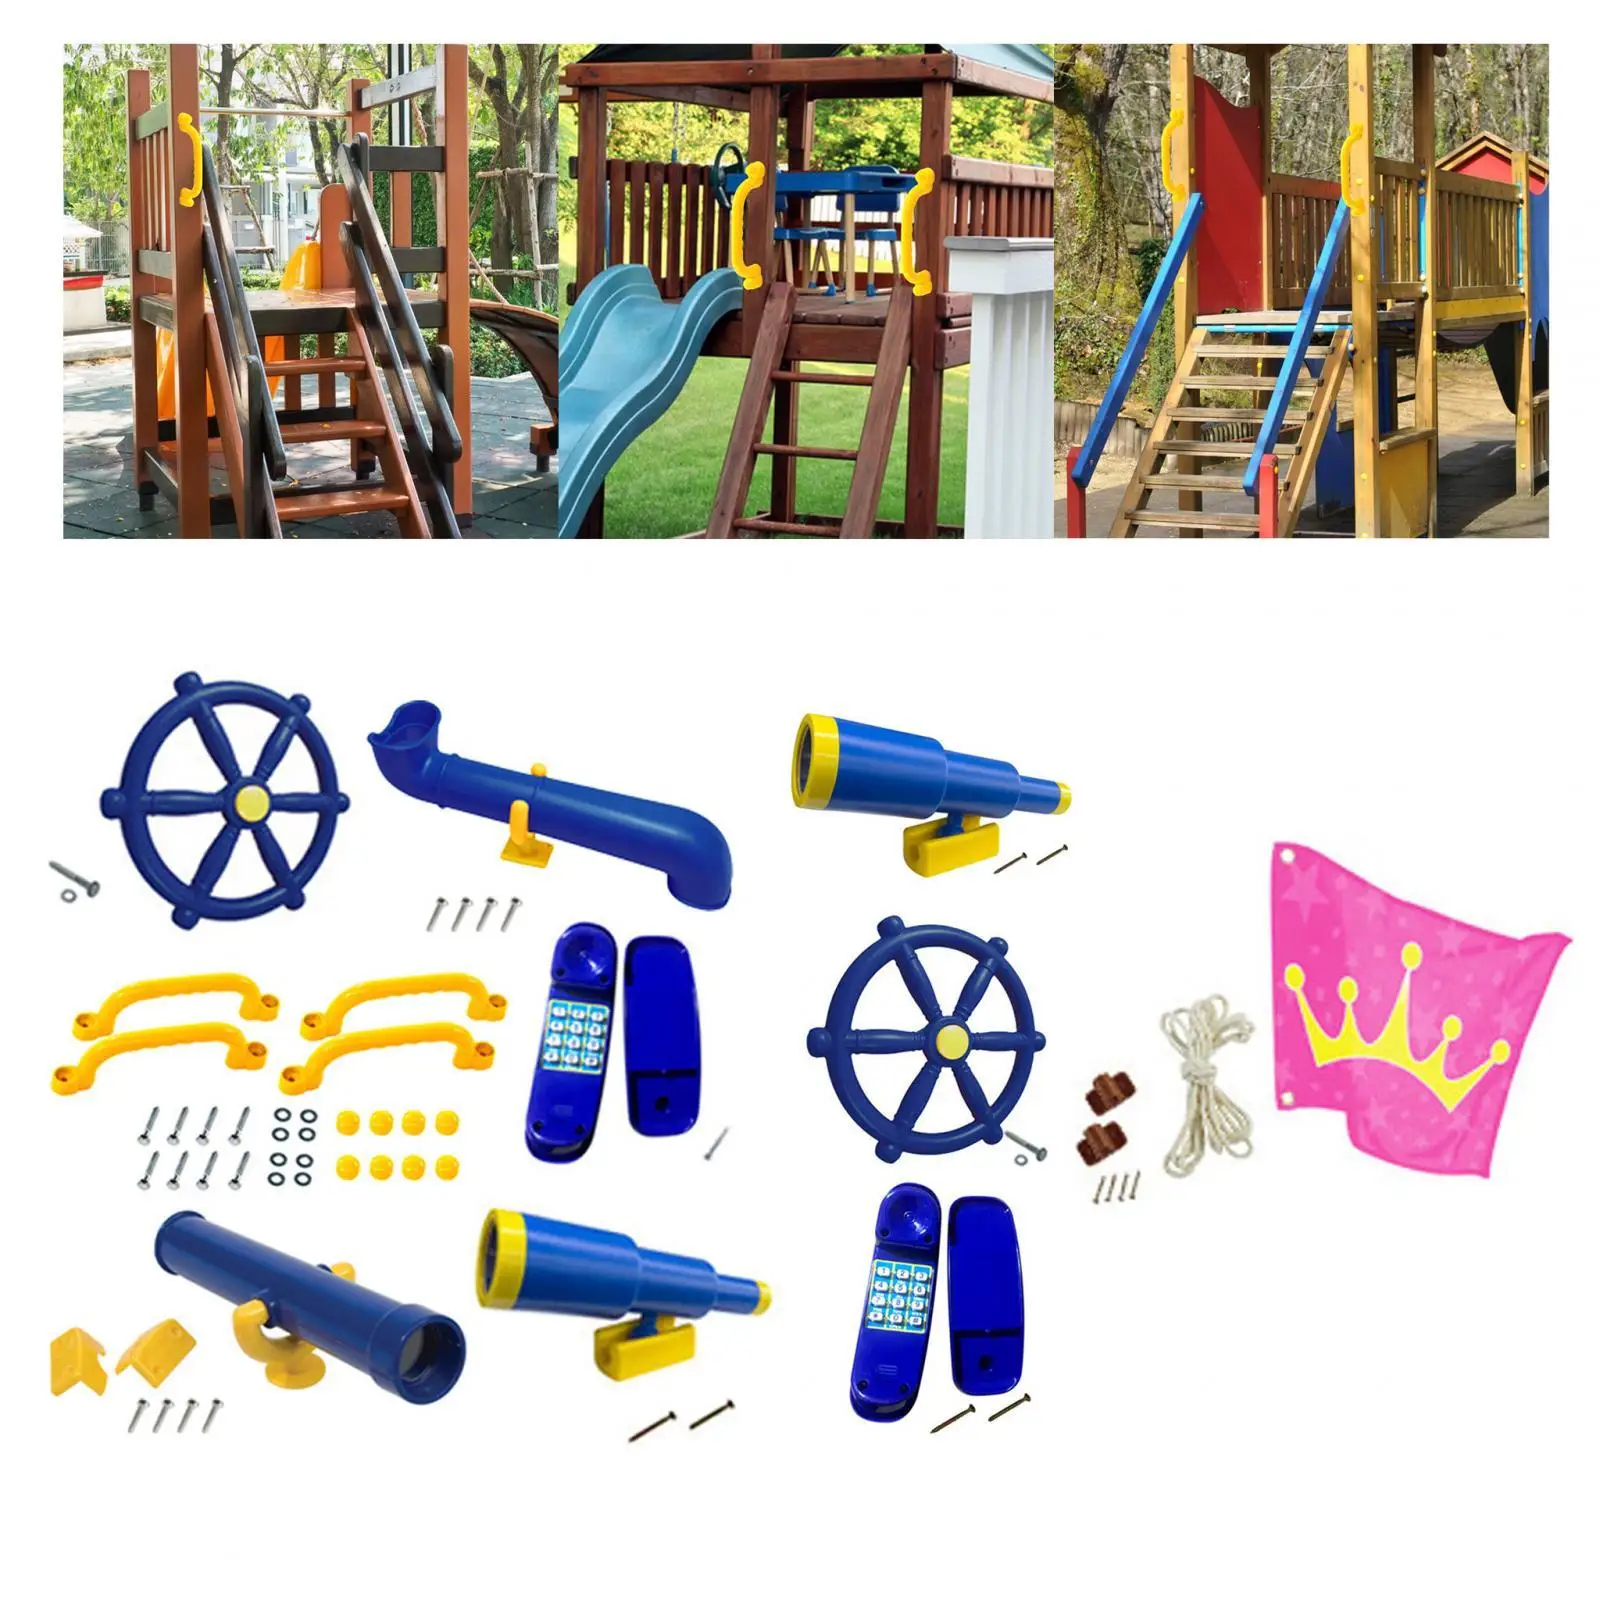 Playground Equipment Outdoor Amusement Parts Swing Set Attachments for Backyard Tree House Play House Swingset